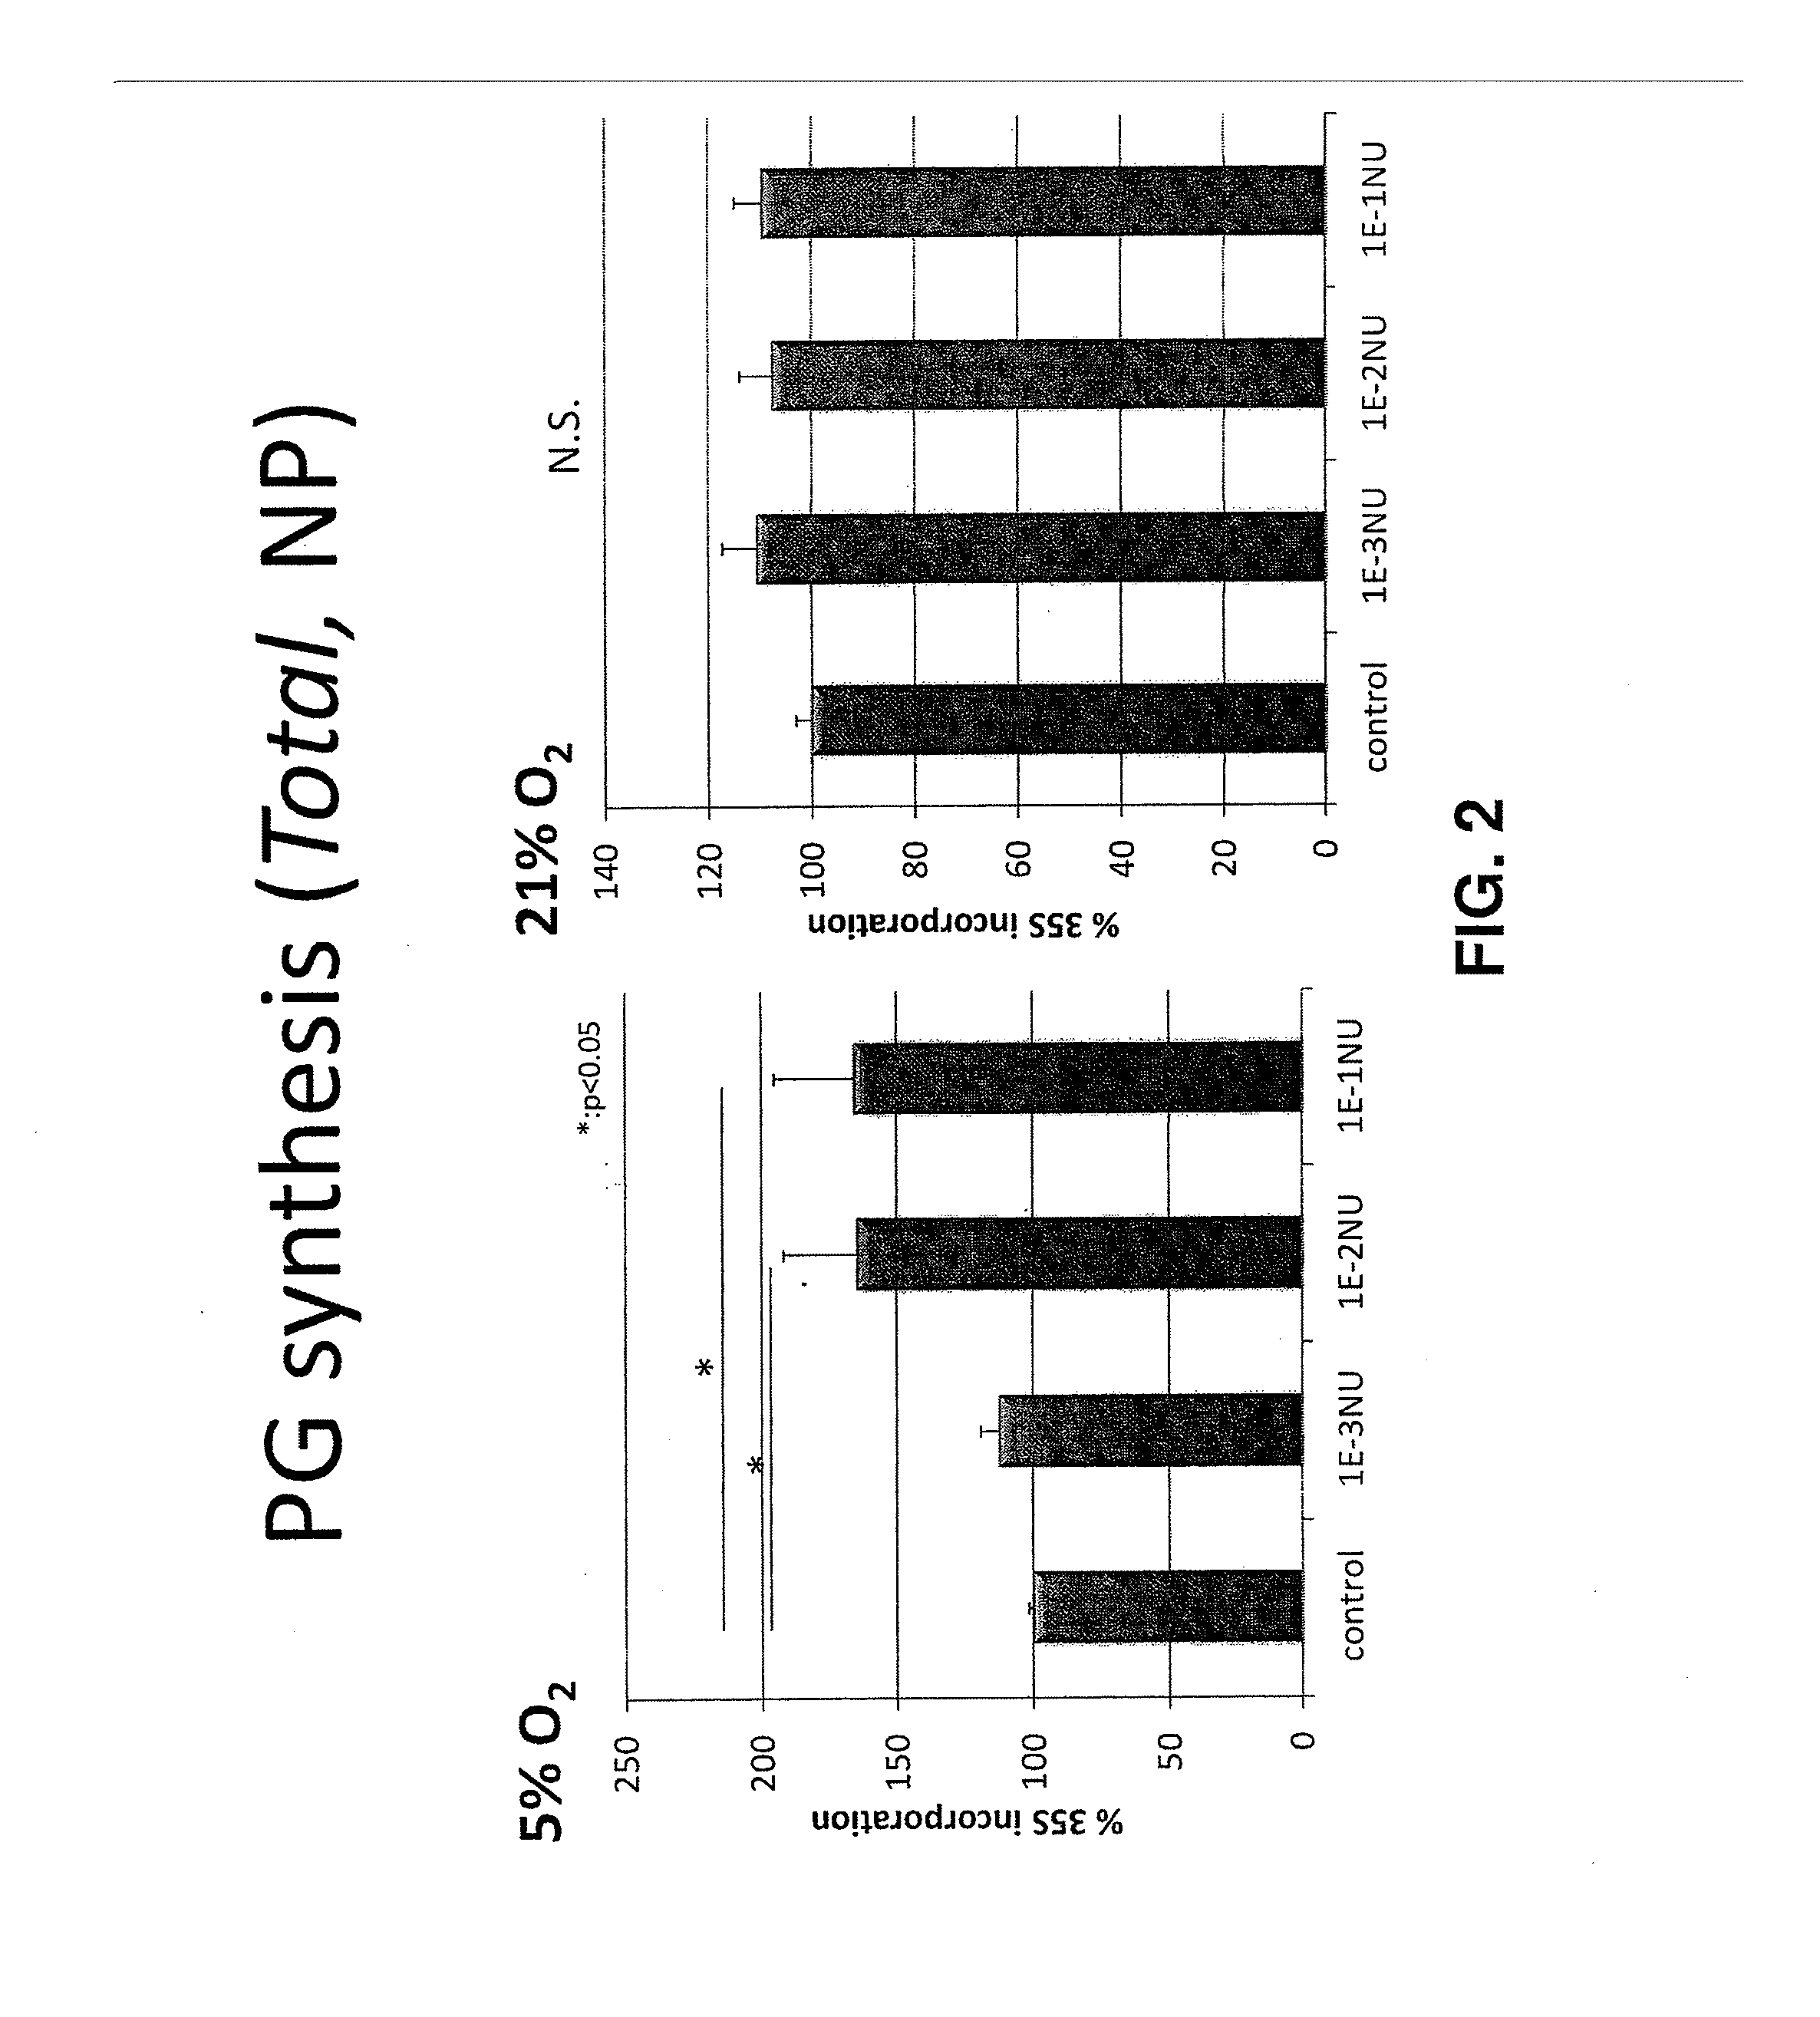 Method for promoting the synthesis of collagen and proteoglycan in chondrocytes